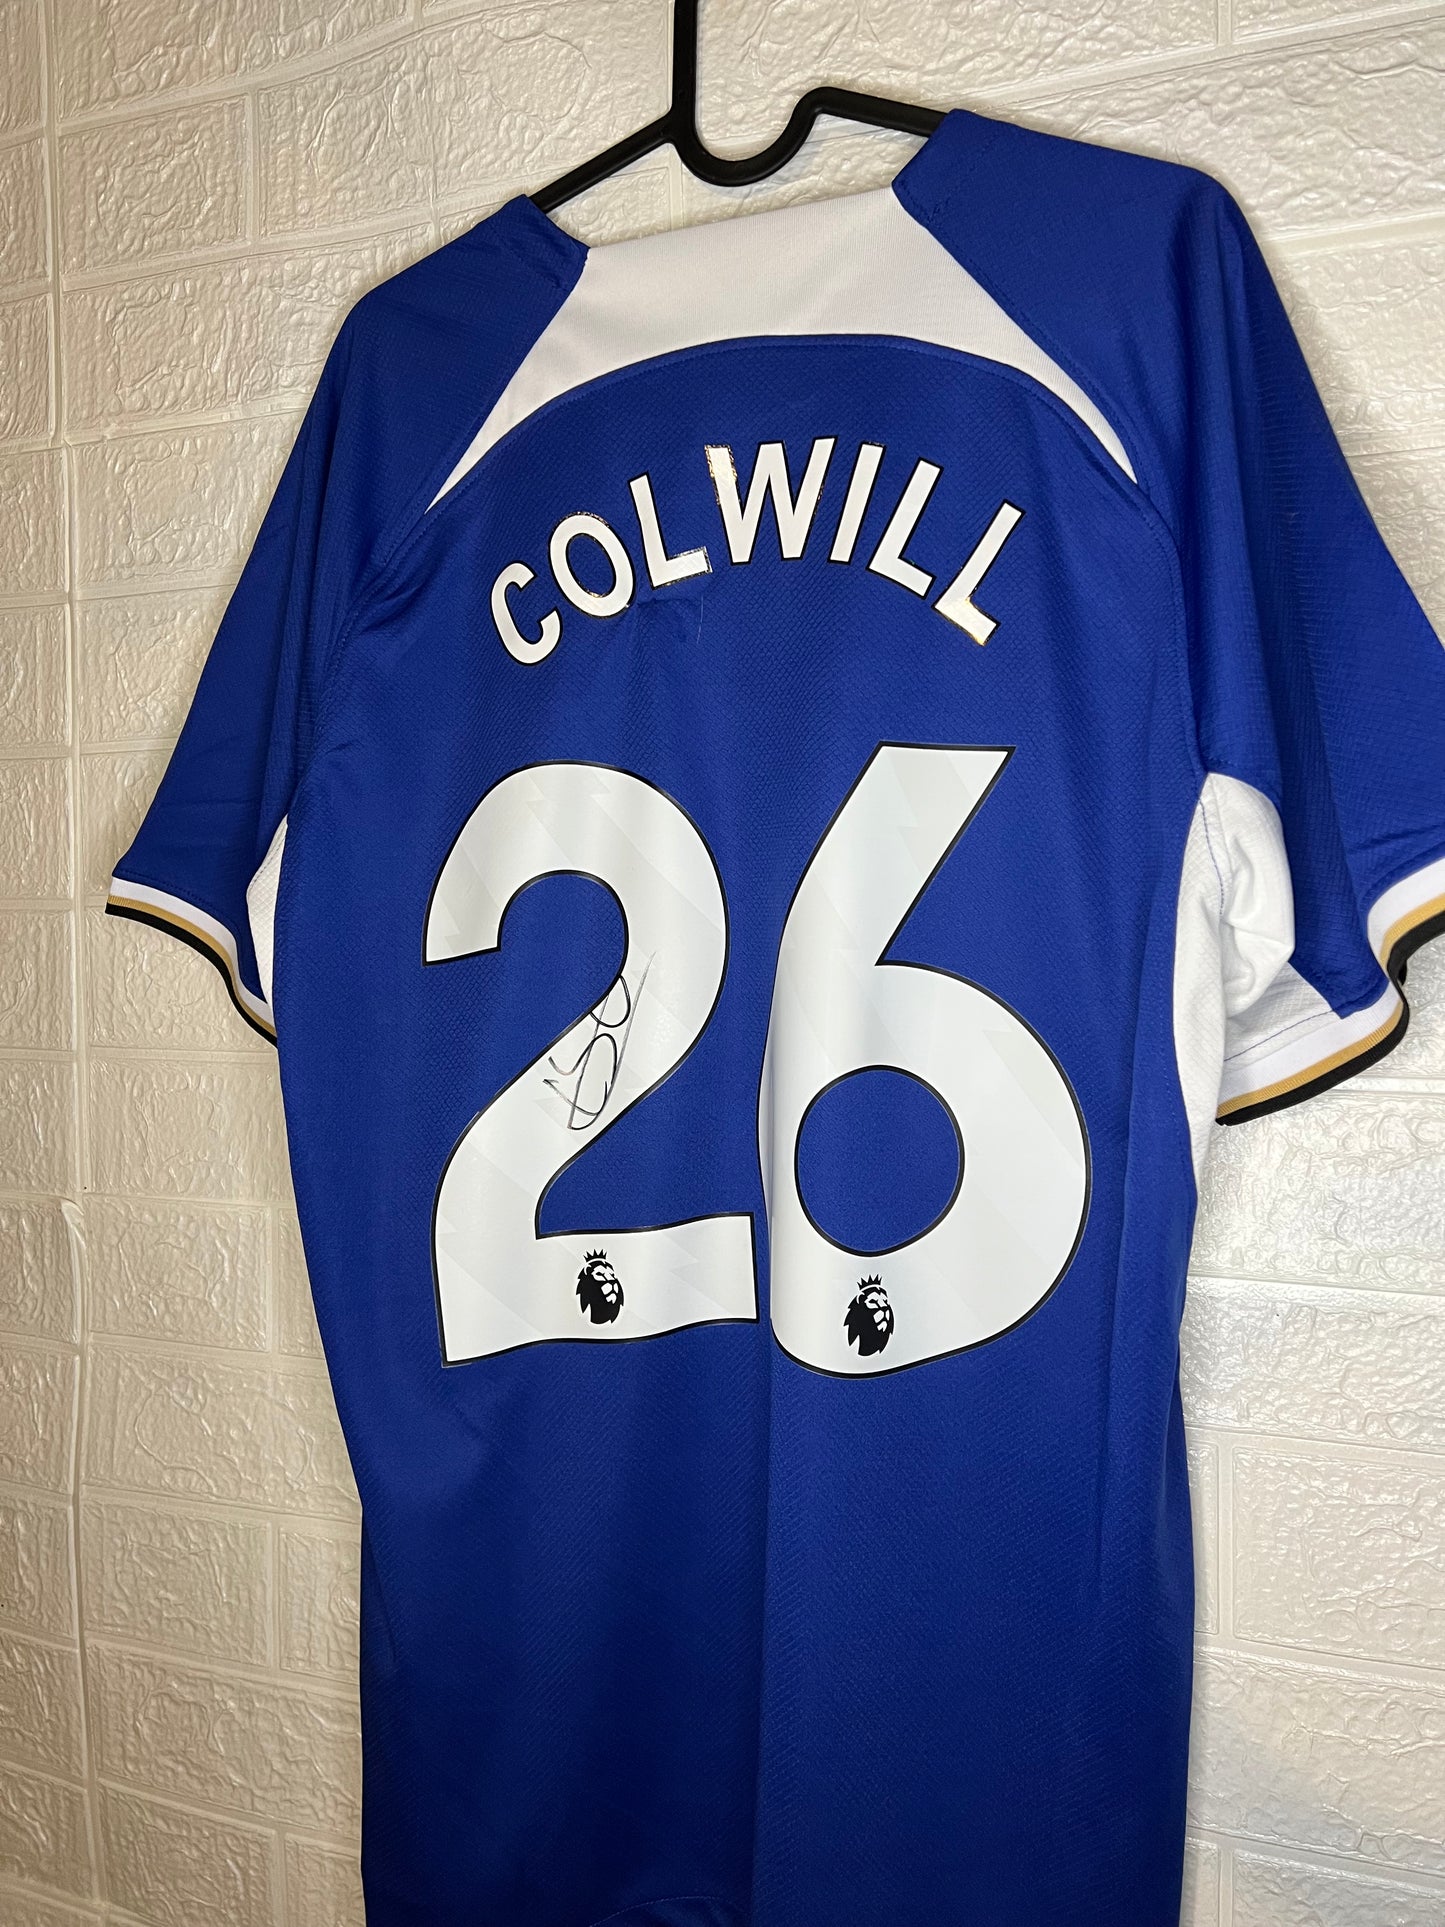 Colwill signed Chelsea shirt